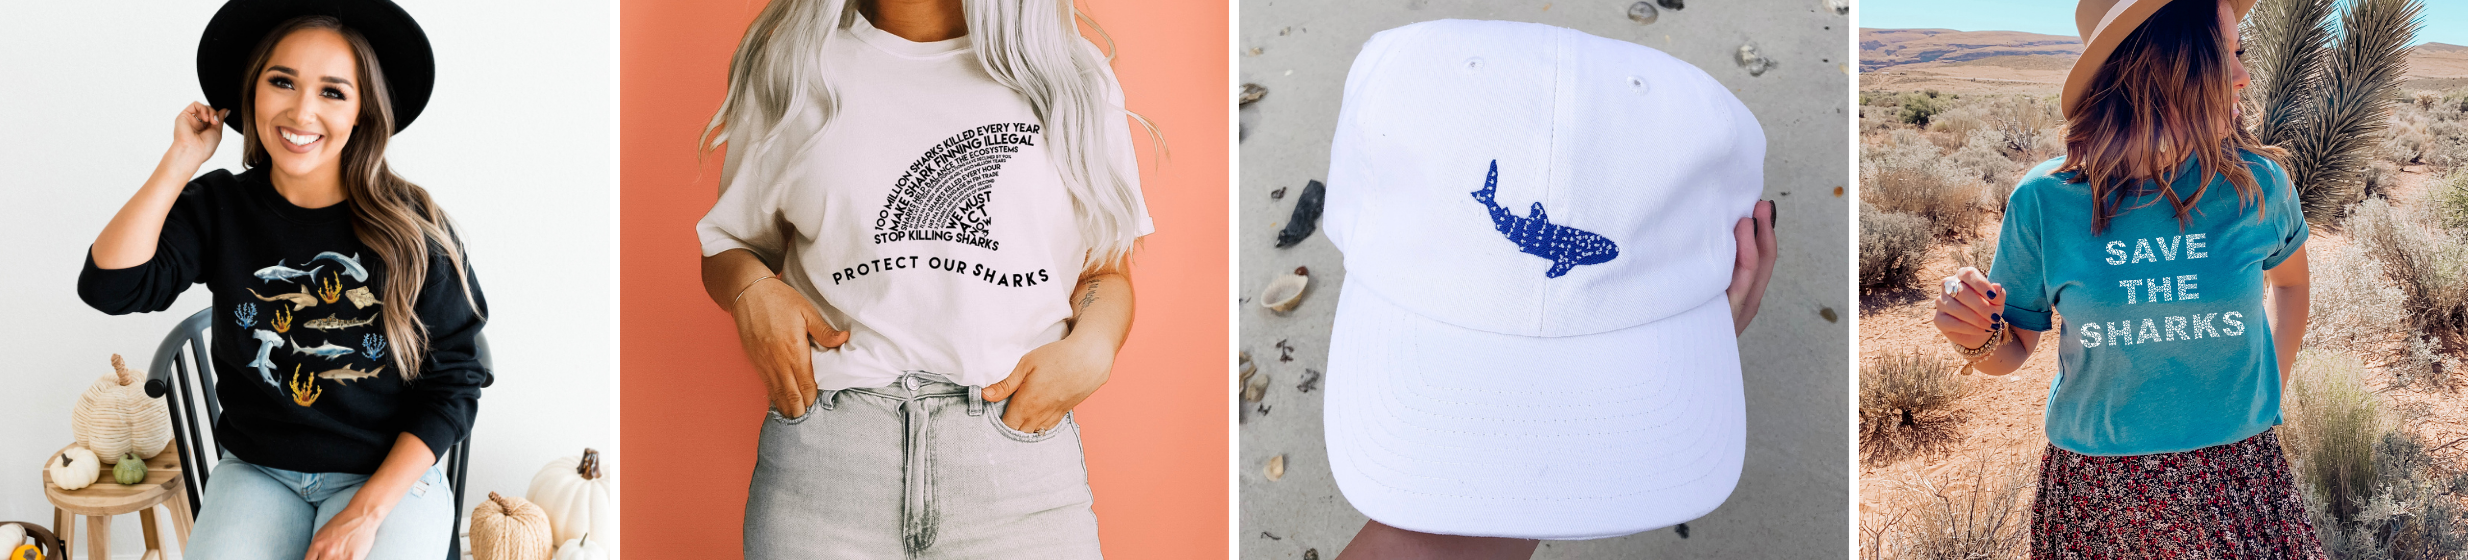 collage of sweetsherriloudesigns products - woman wearing shirt with sharks, woman wearing shark fin tshirt, whale shark cotton cap, and save the sharks tshirt